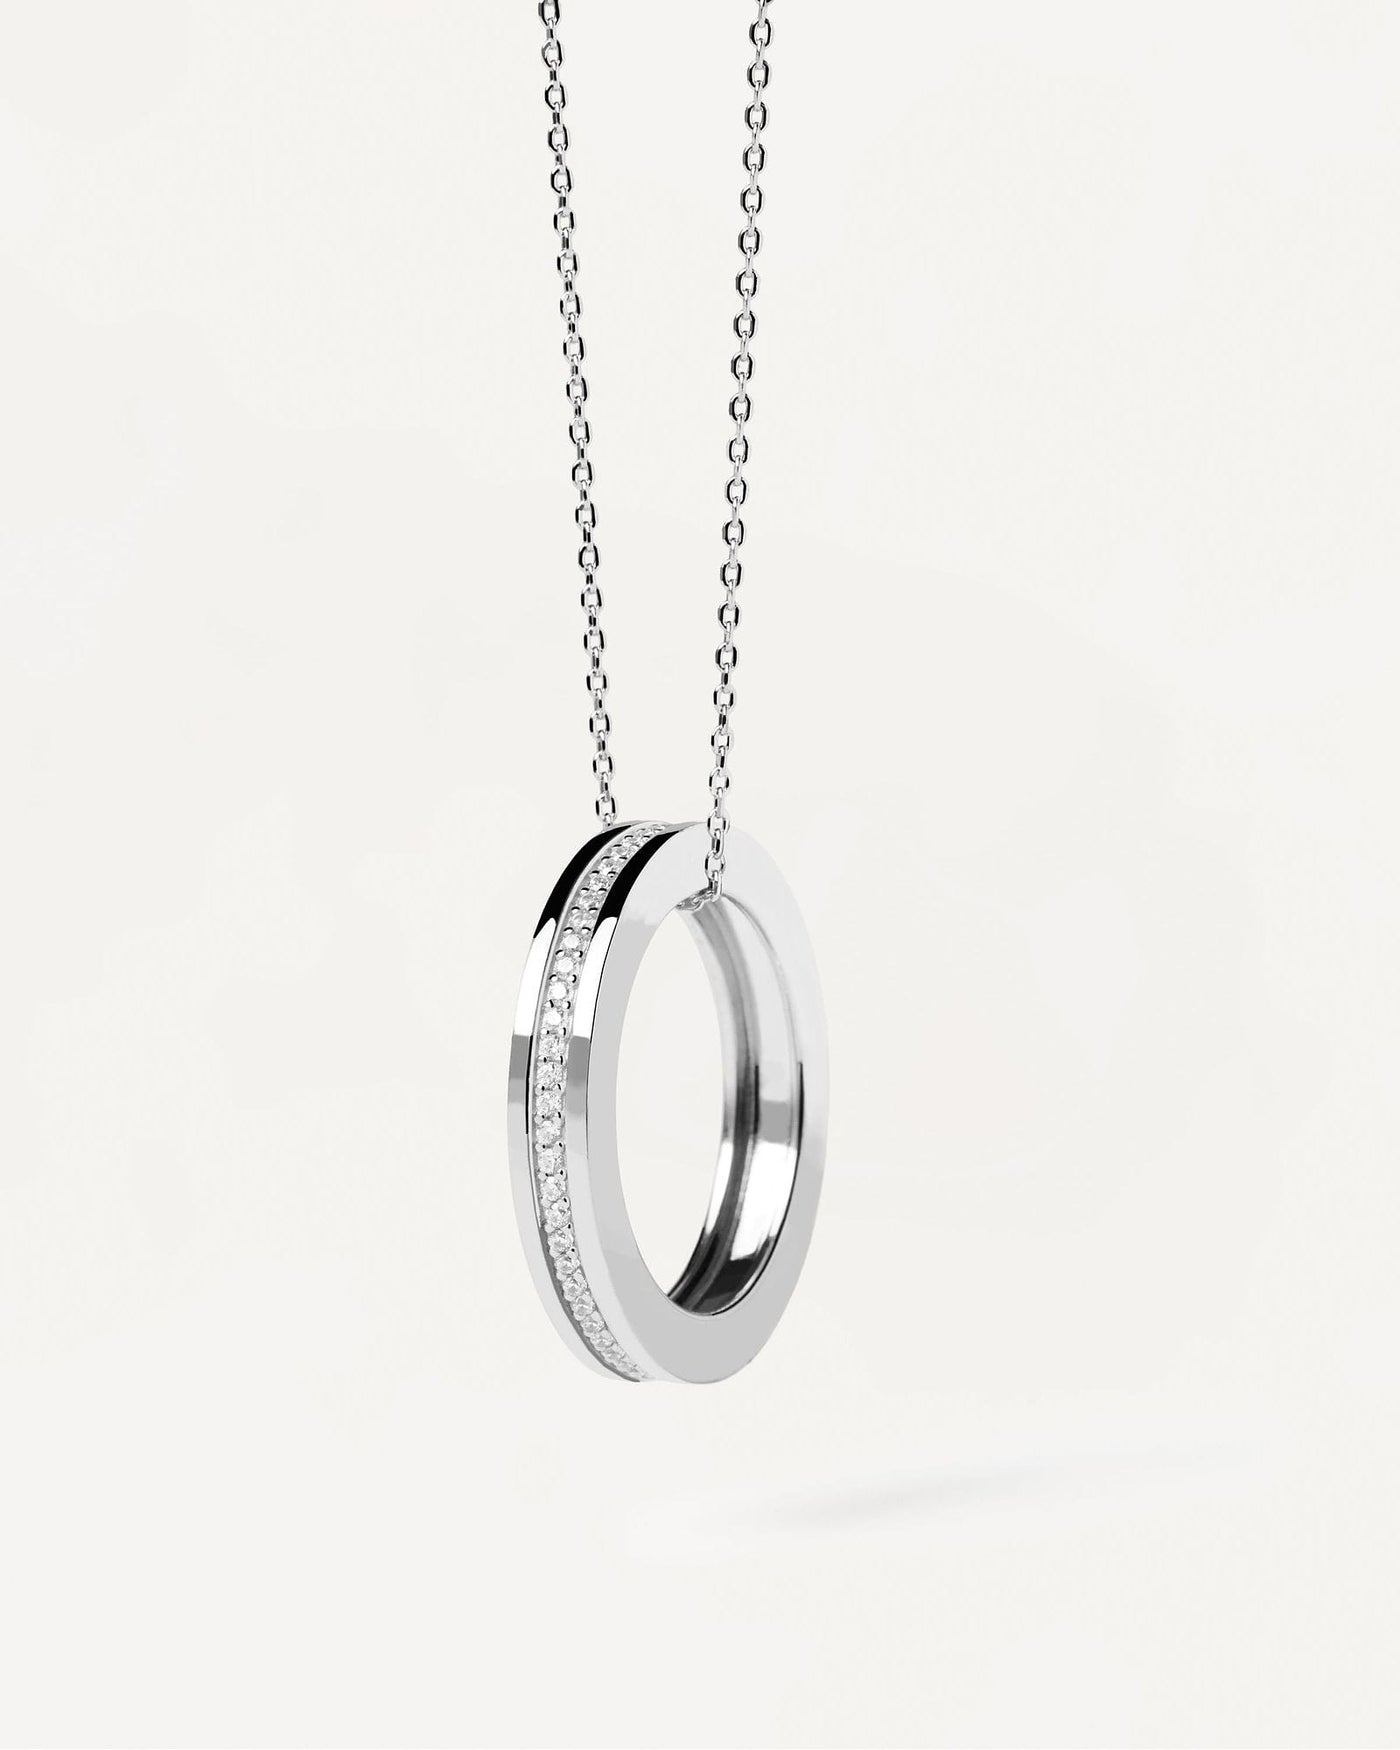 2024 Selection | Infinity Silver Necklace. Sterling silver necklace with ring pendant. Get the latest arrival from PDPAOLA. Place your order safely and get this Best Seller. Free Shipping.